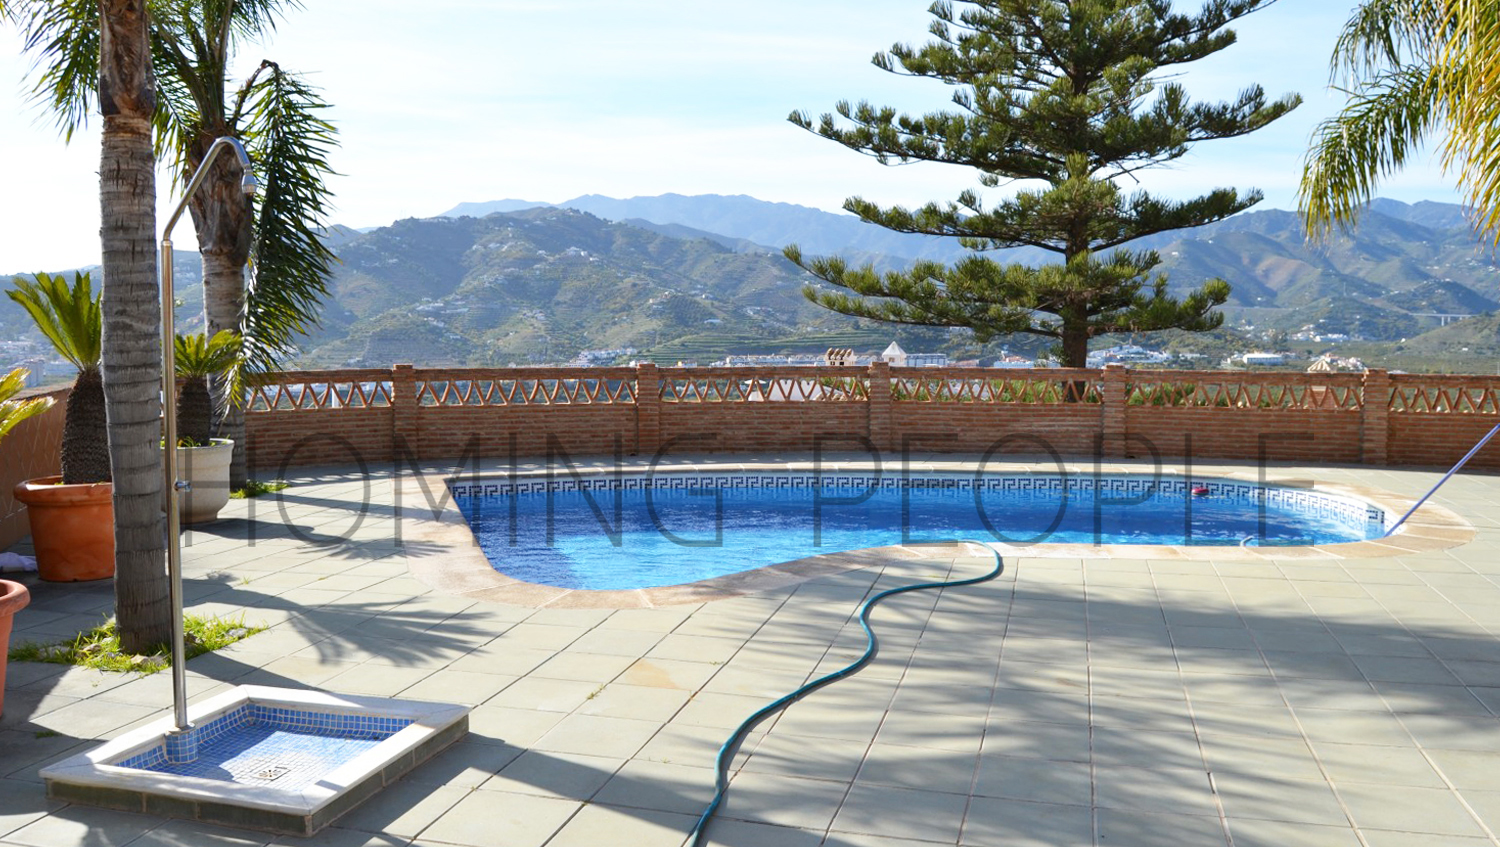 [SOLD]: Fantastic villa with views of the valley, the sea and the city